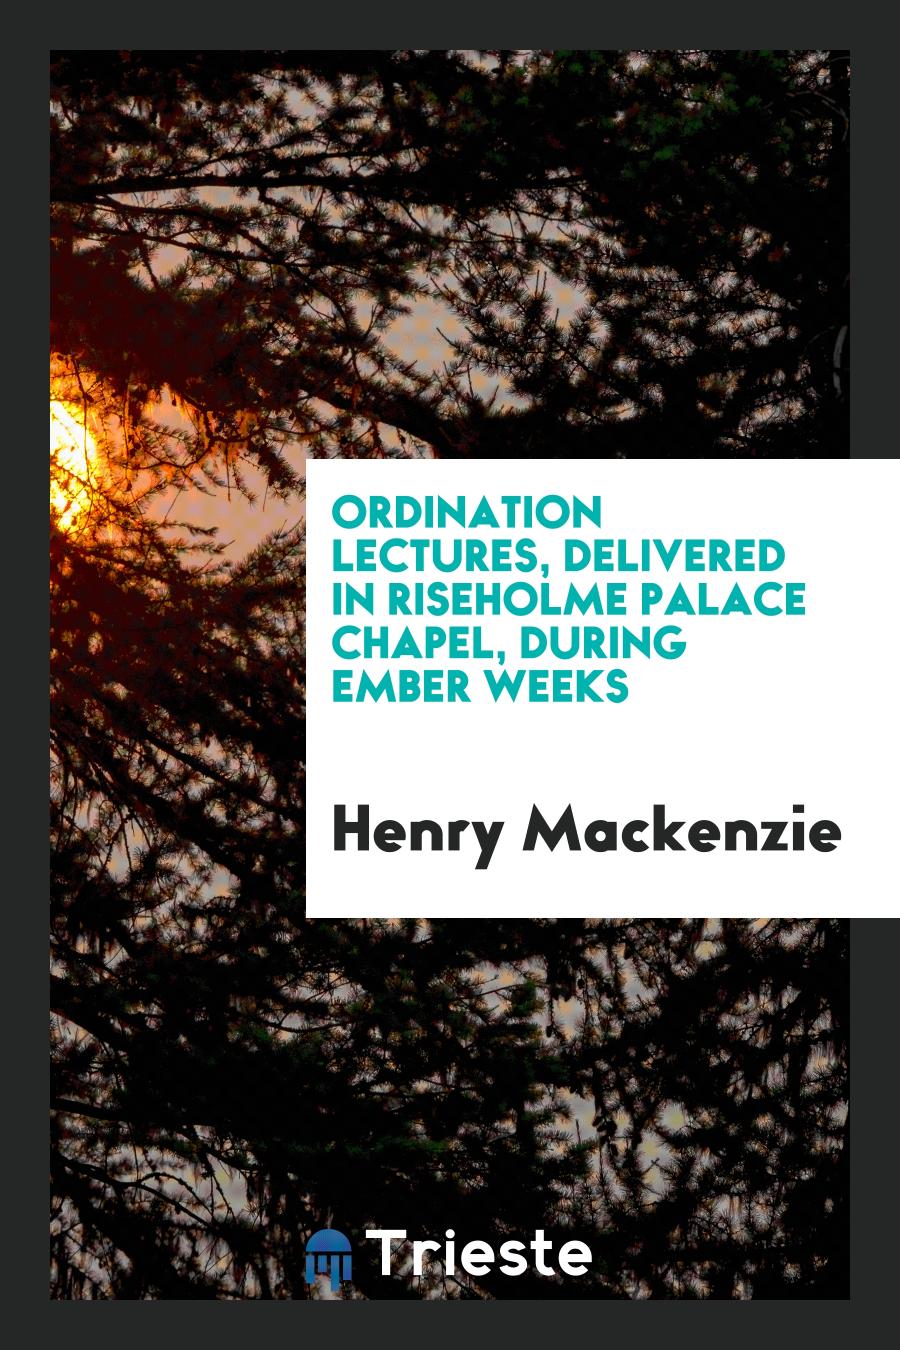 Ordination Lectures, Delivered in Riseholme Palace Chapel, During Ember Weeks